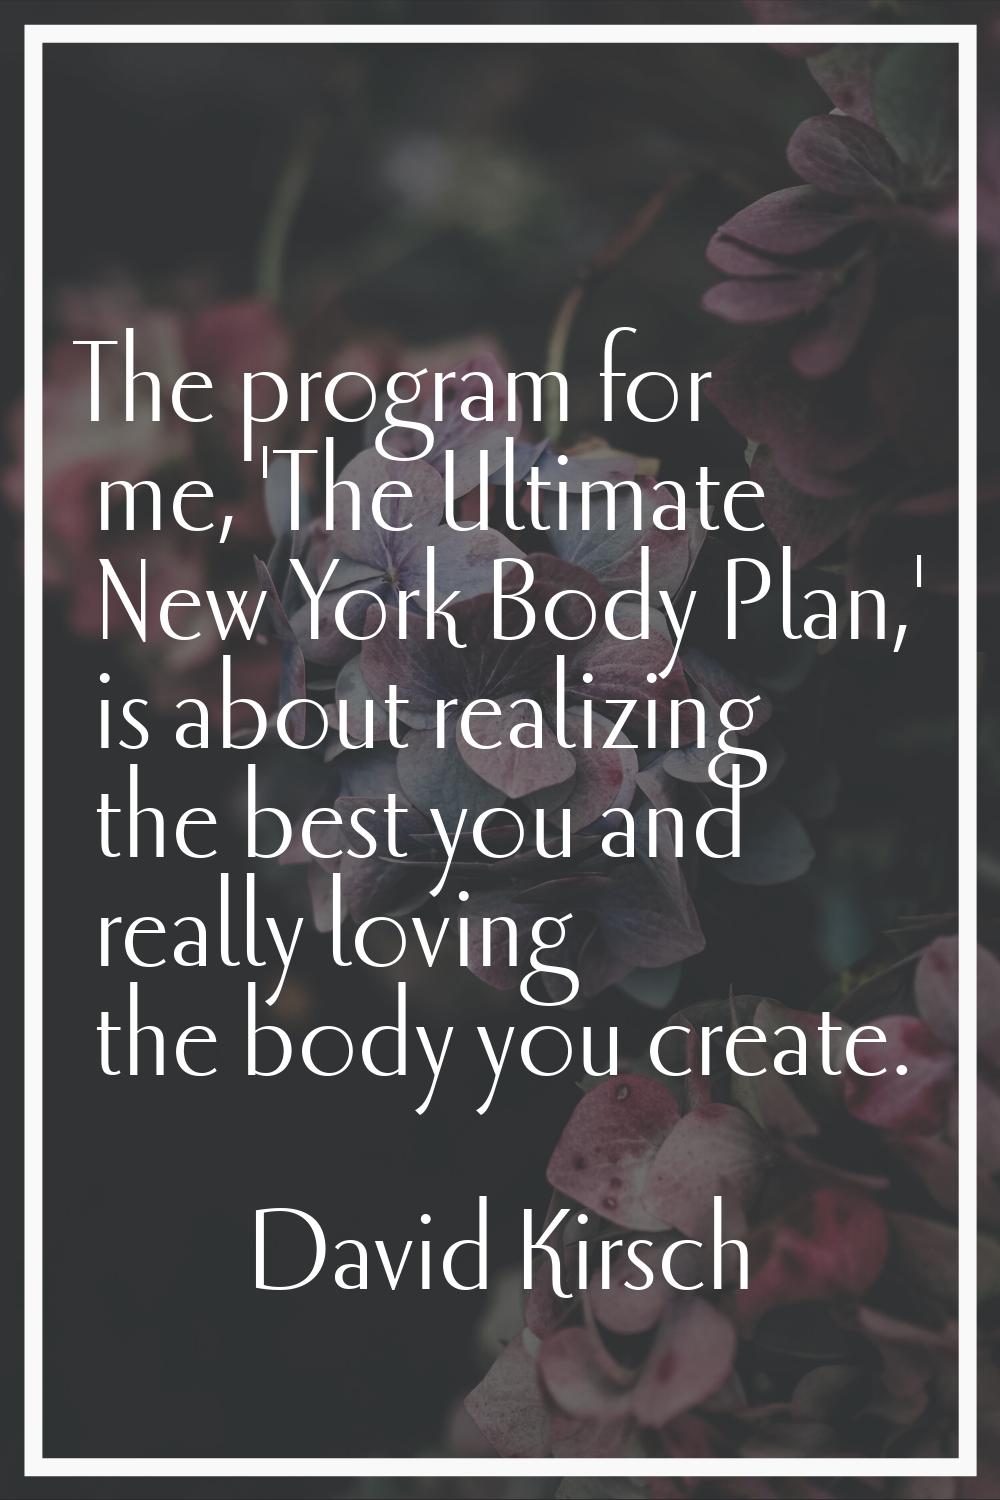 The program for me, 'The Ultimate New York Body Plan,' is about realizing the best you and really l